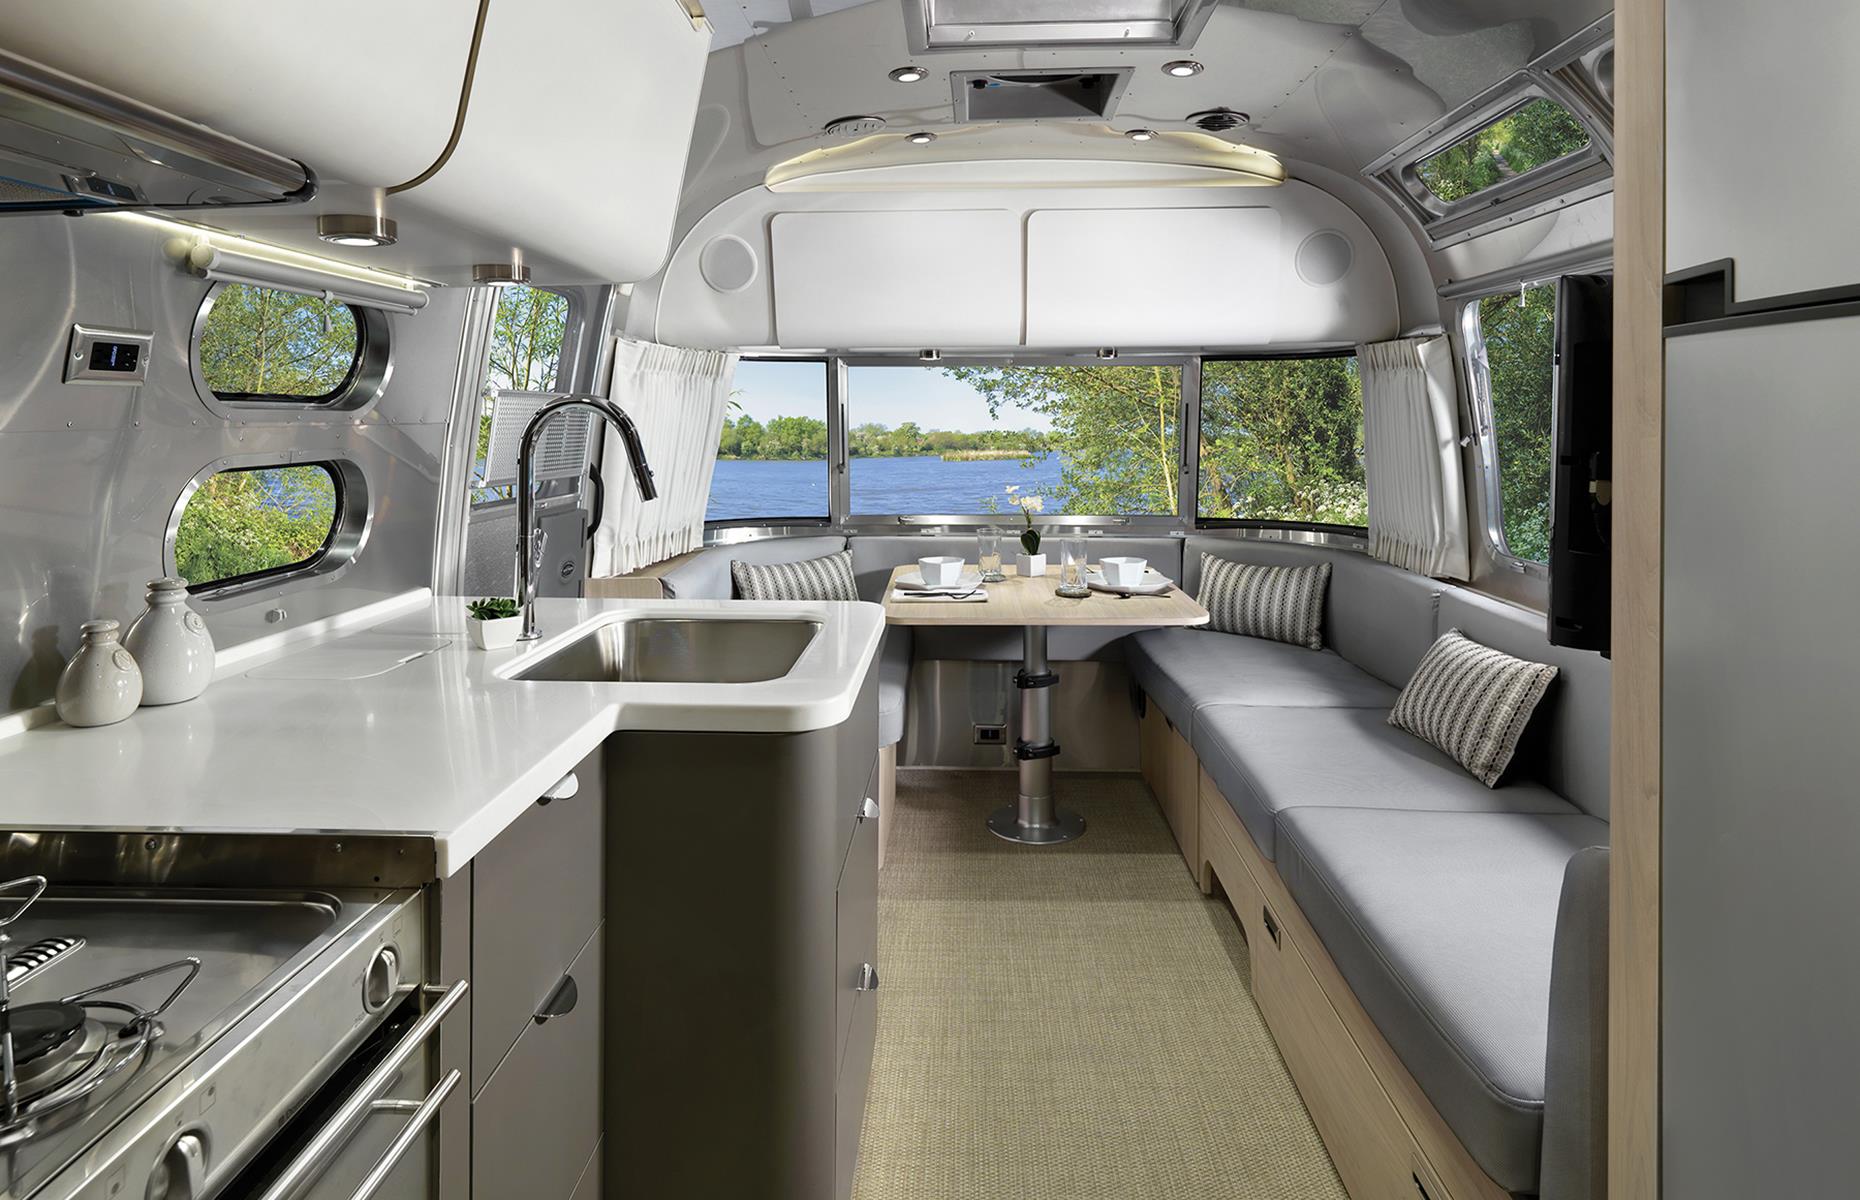 <p>At the other end of the spectrum, the company's Globetrotter model comes as a 30-foot (9m) trailer with an extensive kitchen, lounge seat dining area, USB outlets, climate control and rear-view cameras. For an even bigger trailer, the Classic comes in 33 feet (10m) and comfortably sleeps up to five people. </p>